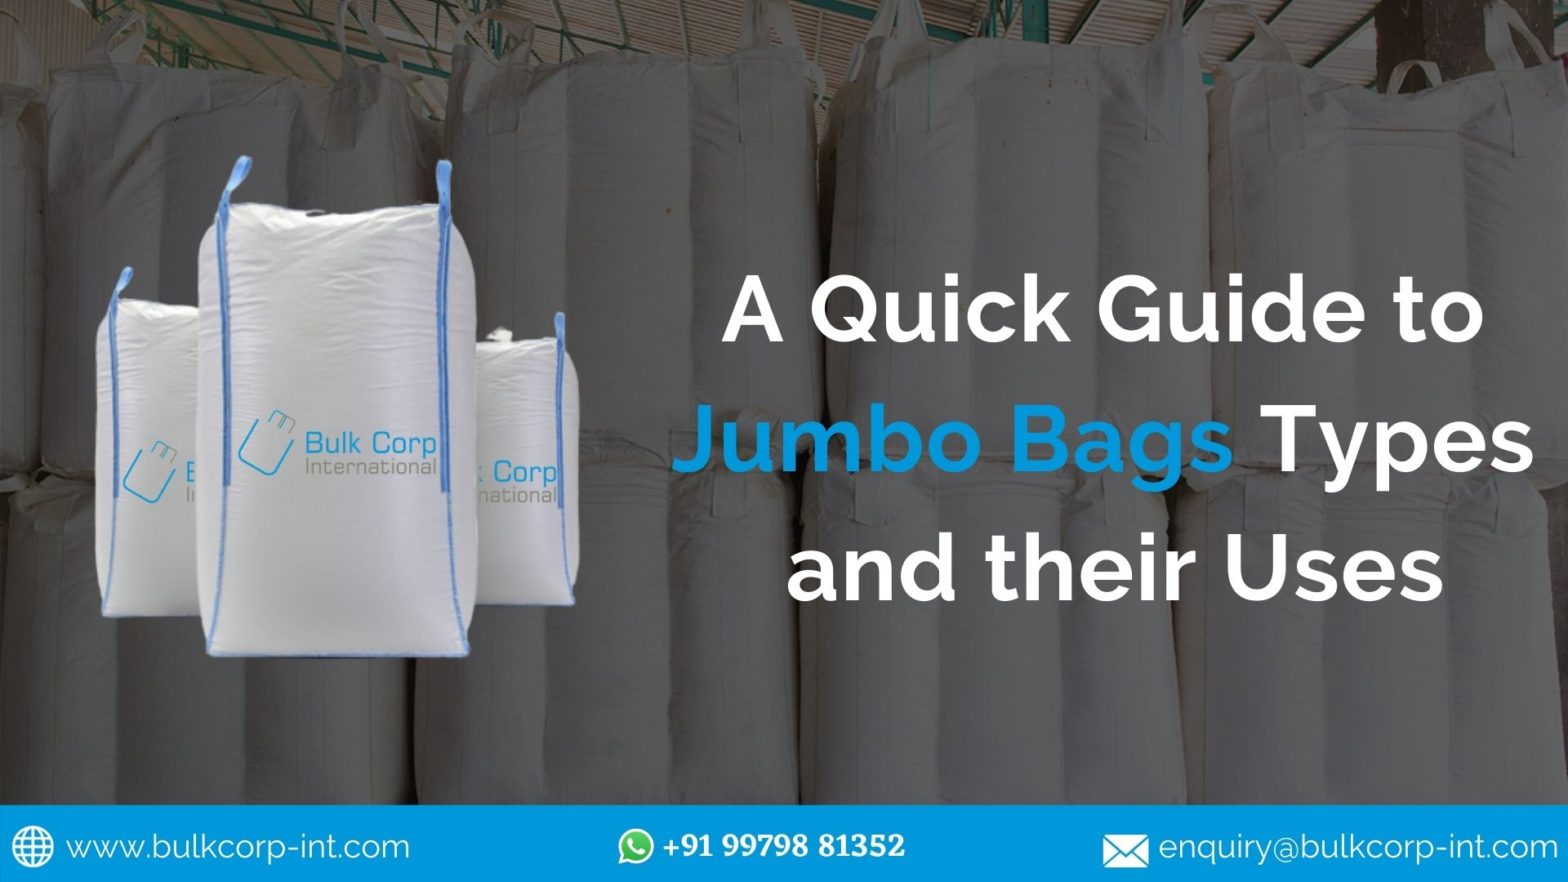 A Quick Guide to Jumbo Bags Types and their Uses | Bulk Crop